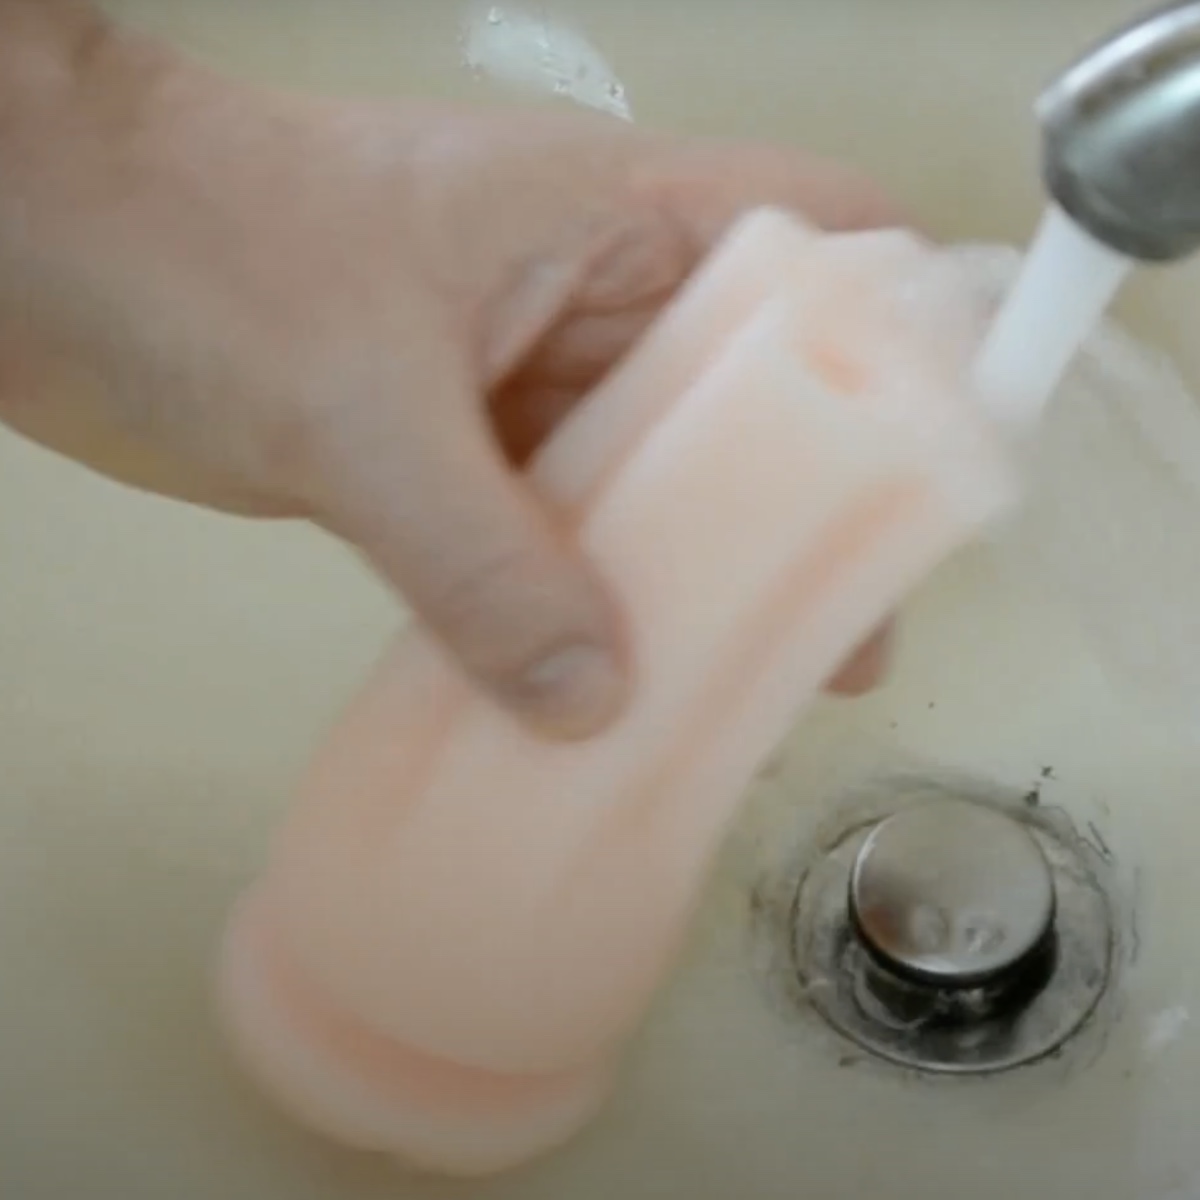 Cleaning and Maintaining Your Fleshlight